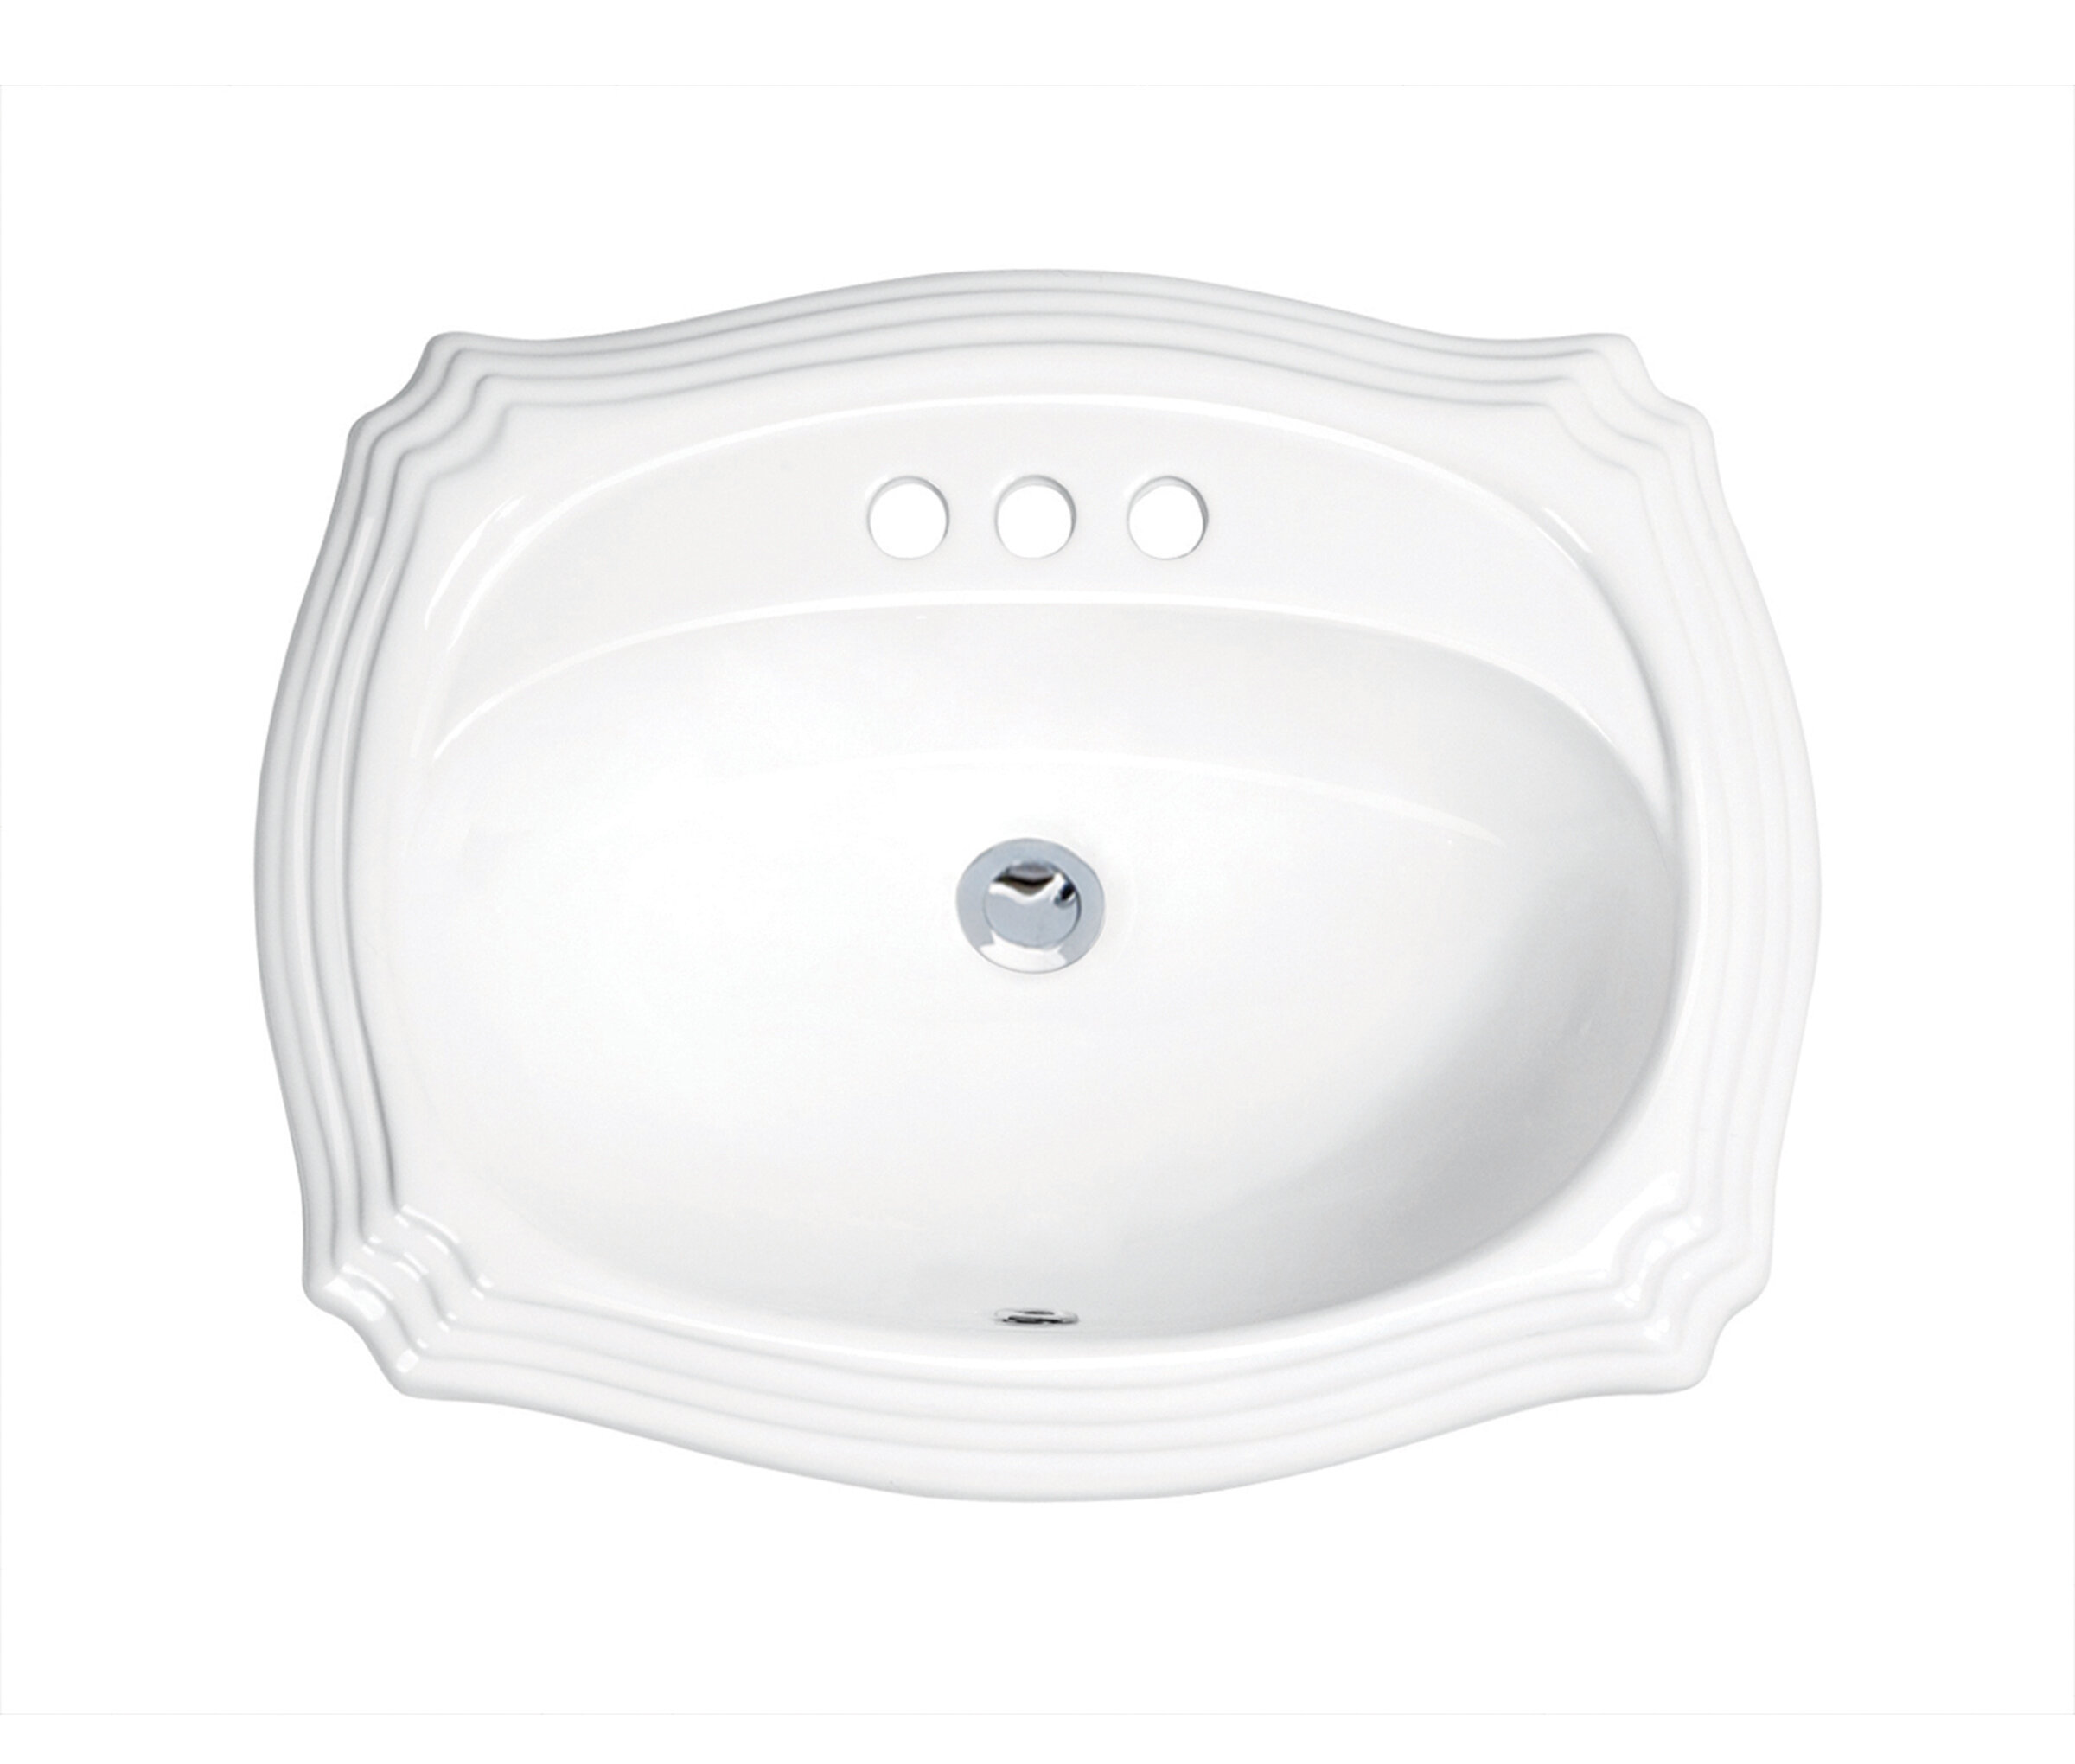 Top Mount Vitreous China Oval Drop In Bathroom Sink With Overflow